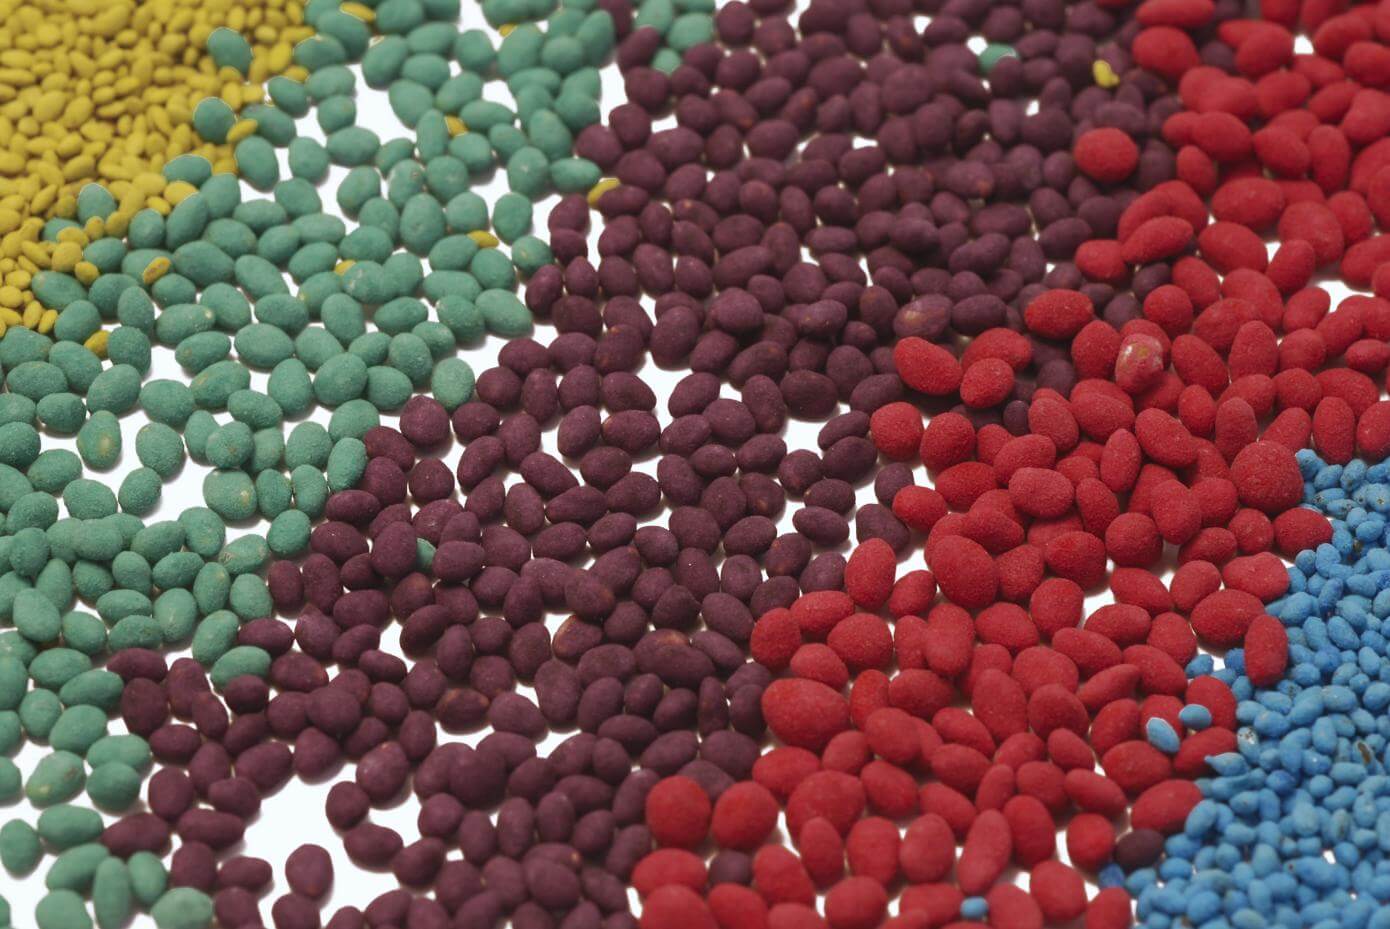 Coated seed in multiple colors